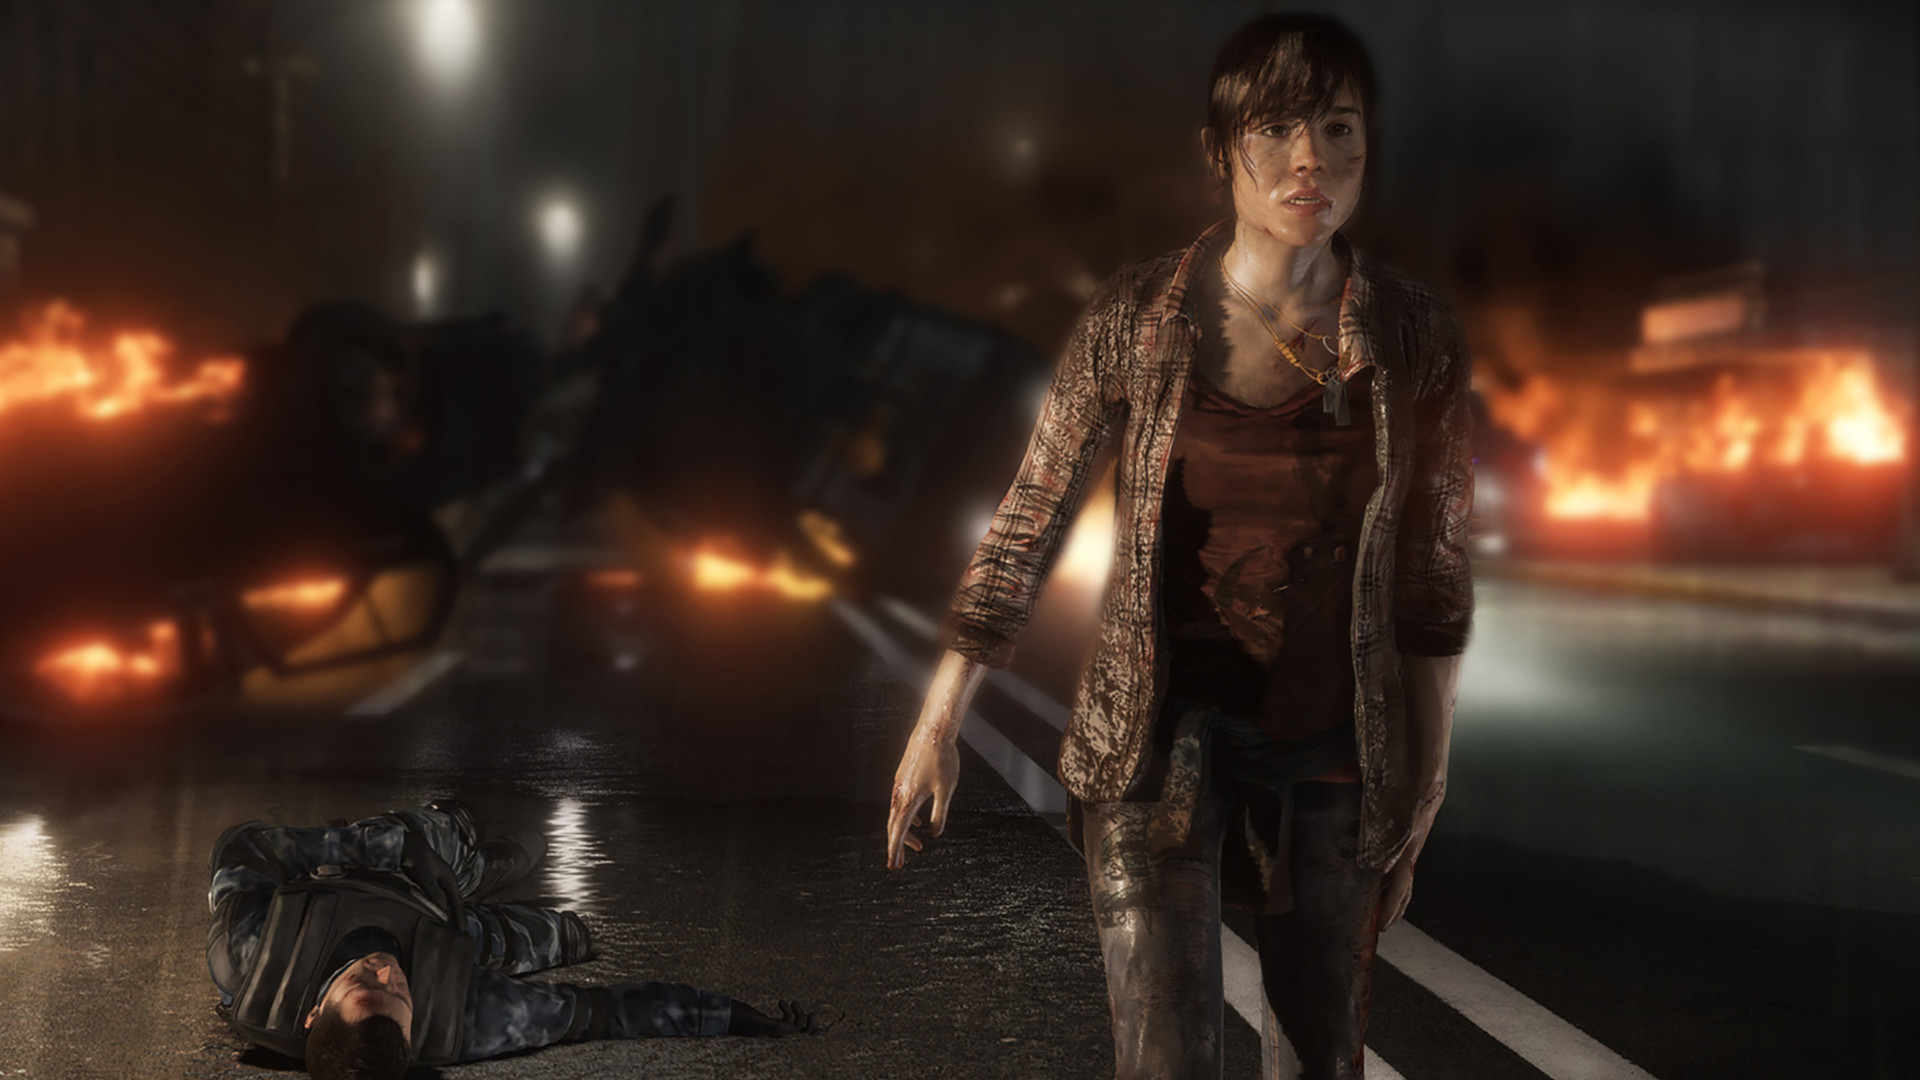 Heavy Rain, Beyond: Two Souls and Detroit: Become Human arrive on Steam